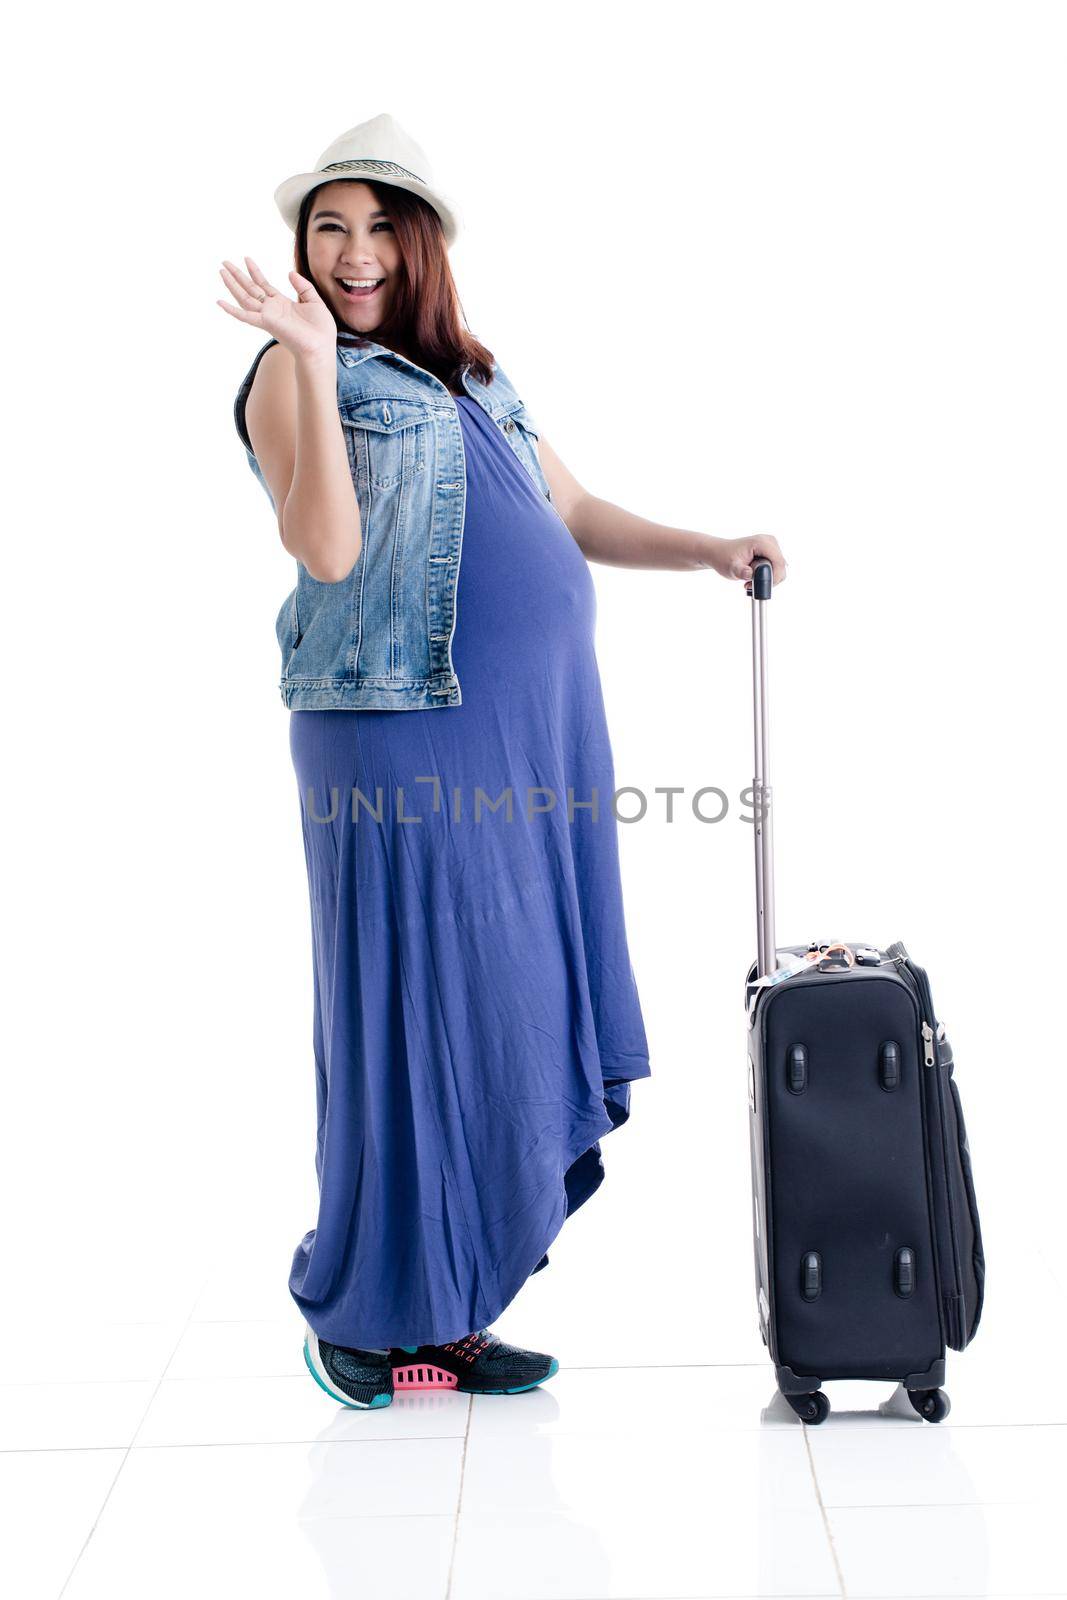 Pregnant woman going for holidays with luggage bag by Kzenon